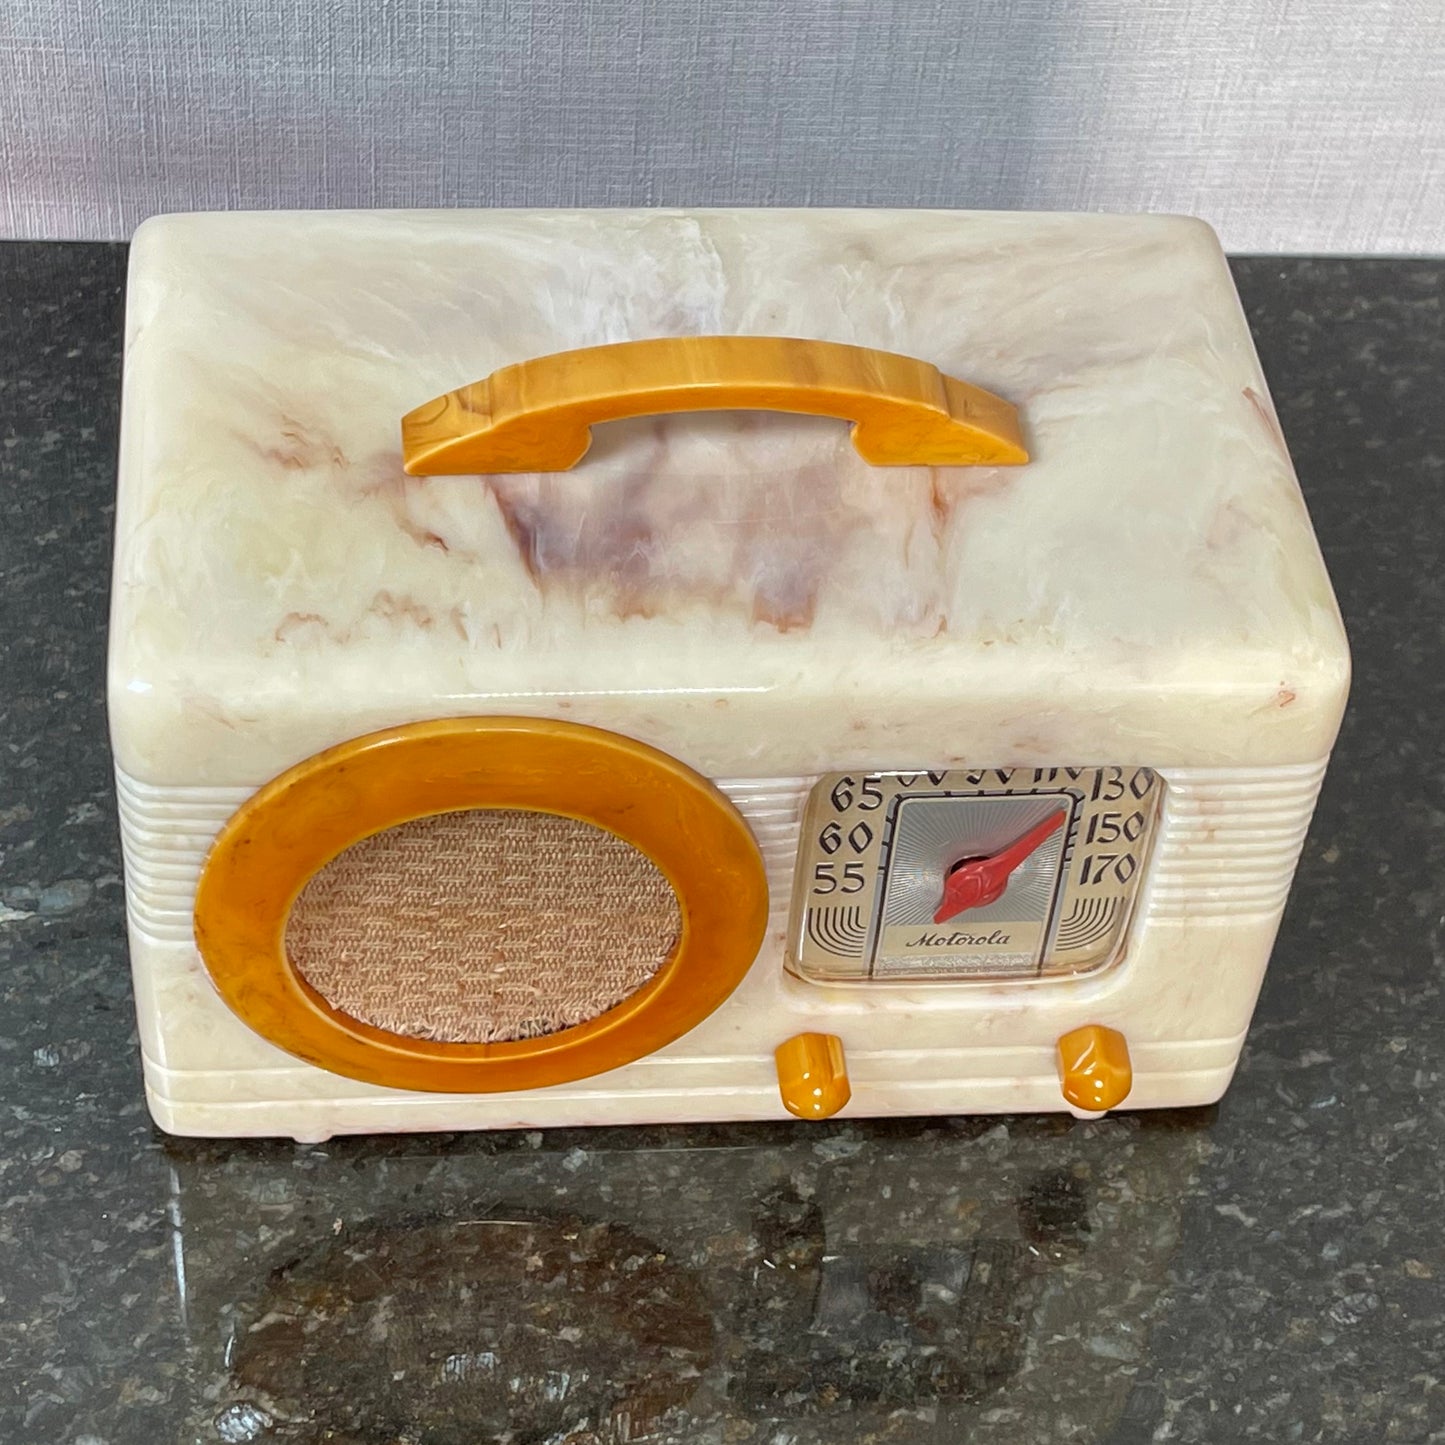 Catalin radio without damage such as cracks, chips, nicks, hairlines, repairs or reproduction parts